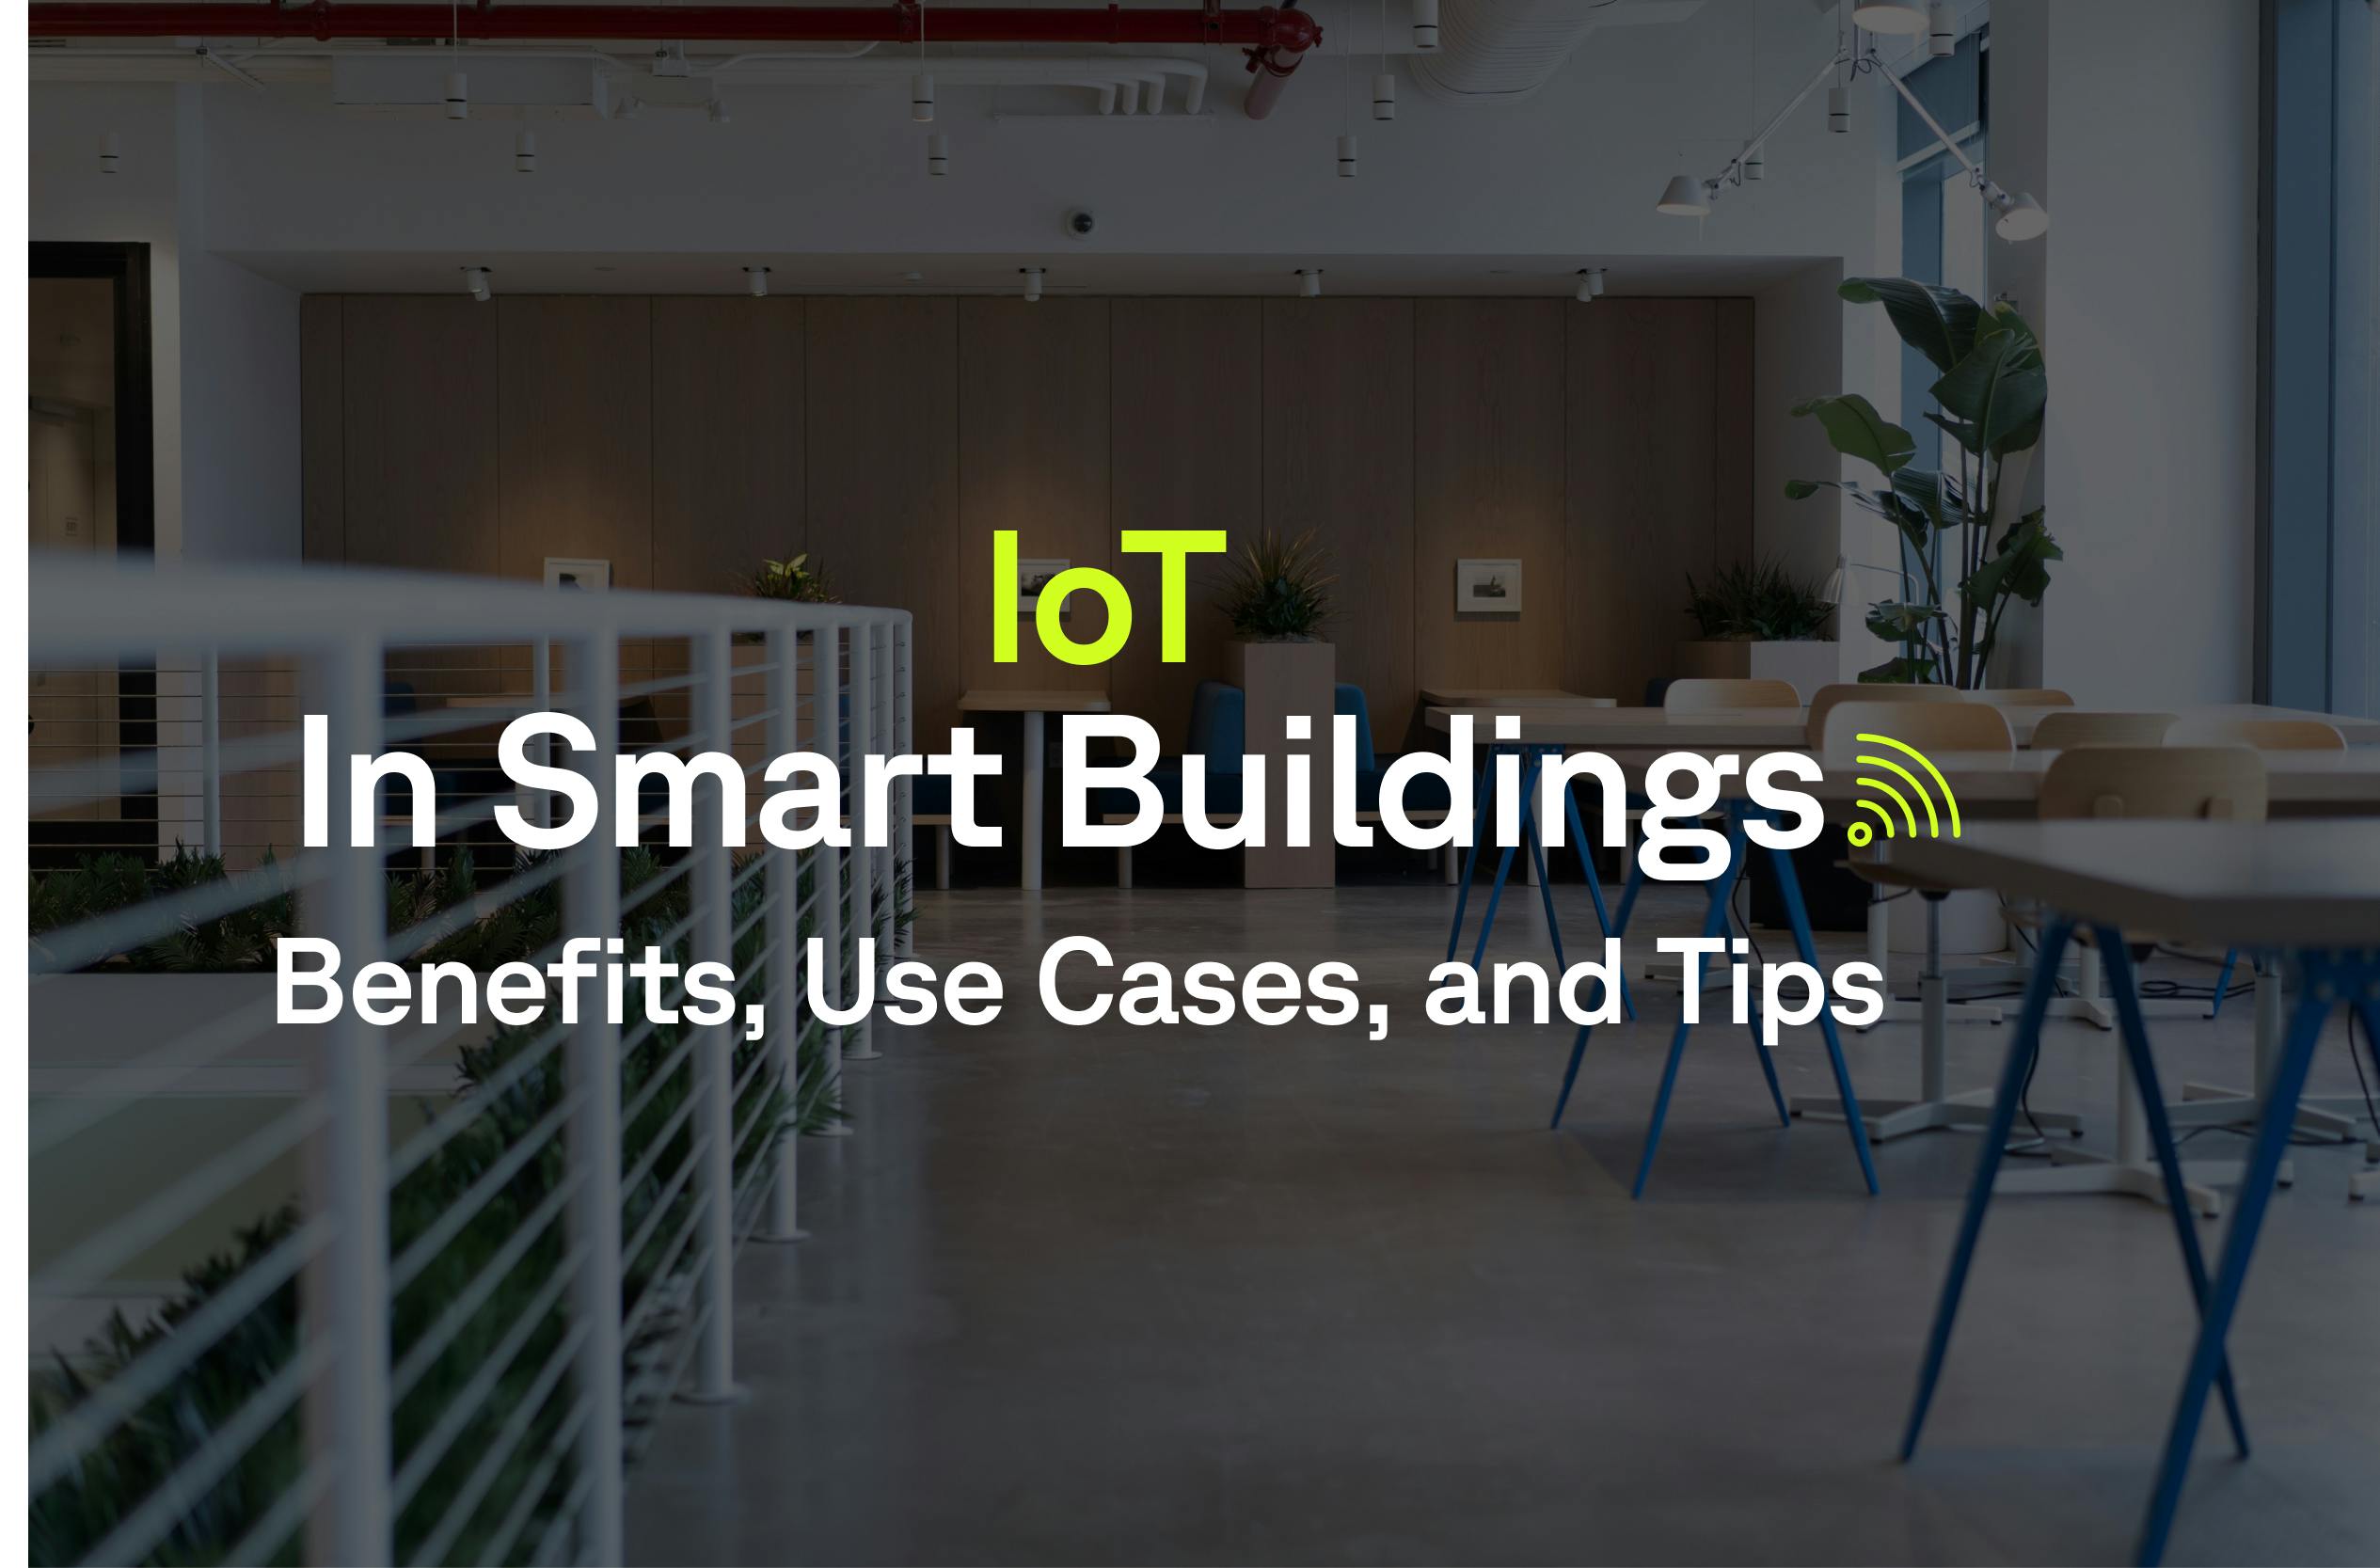 IoT in Smart Buildings: Benefits, Use Cases, and Tips